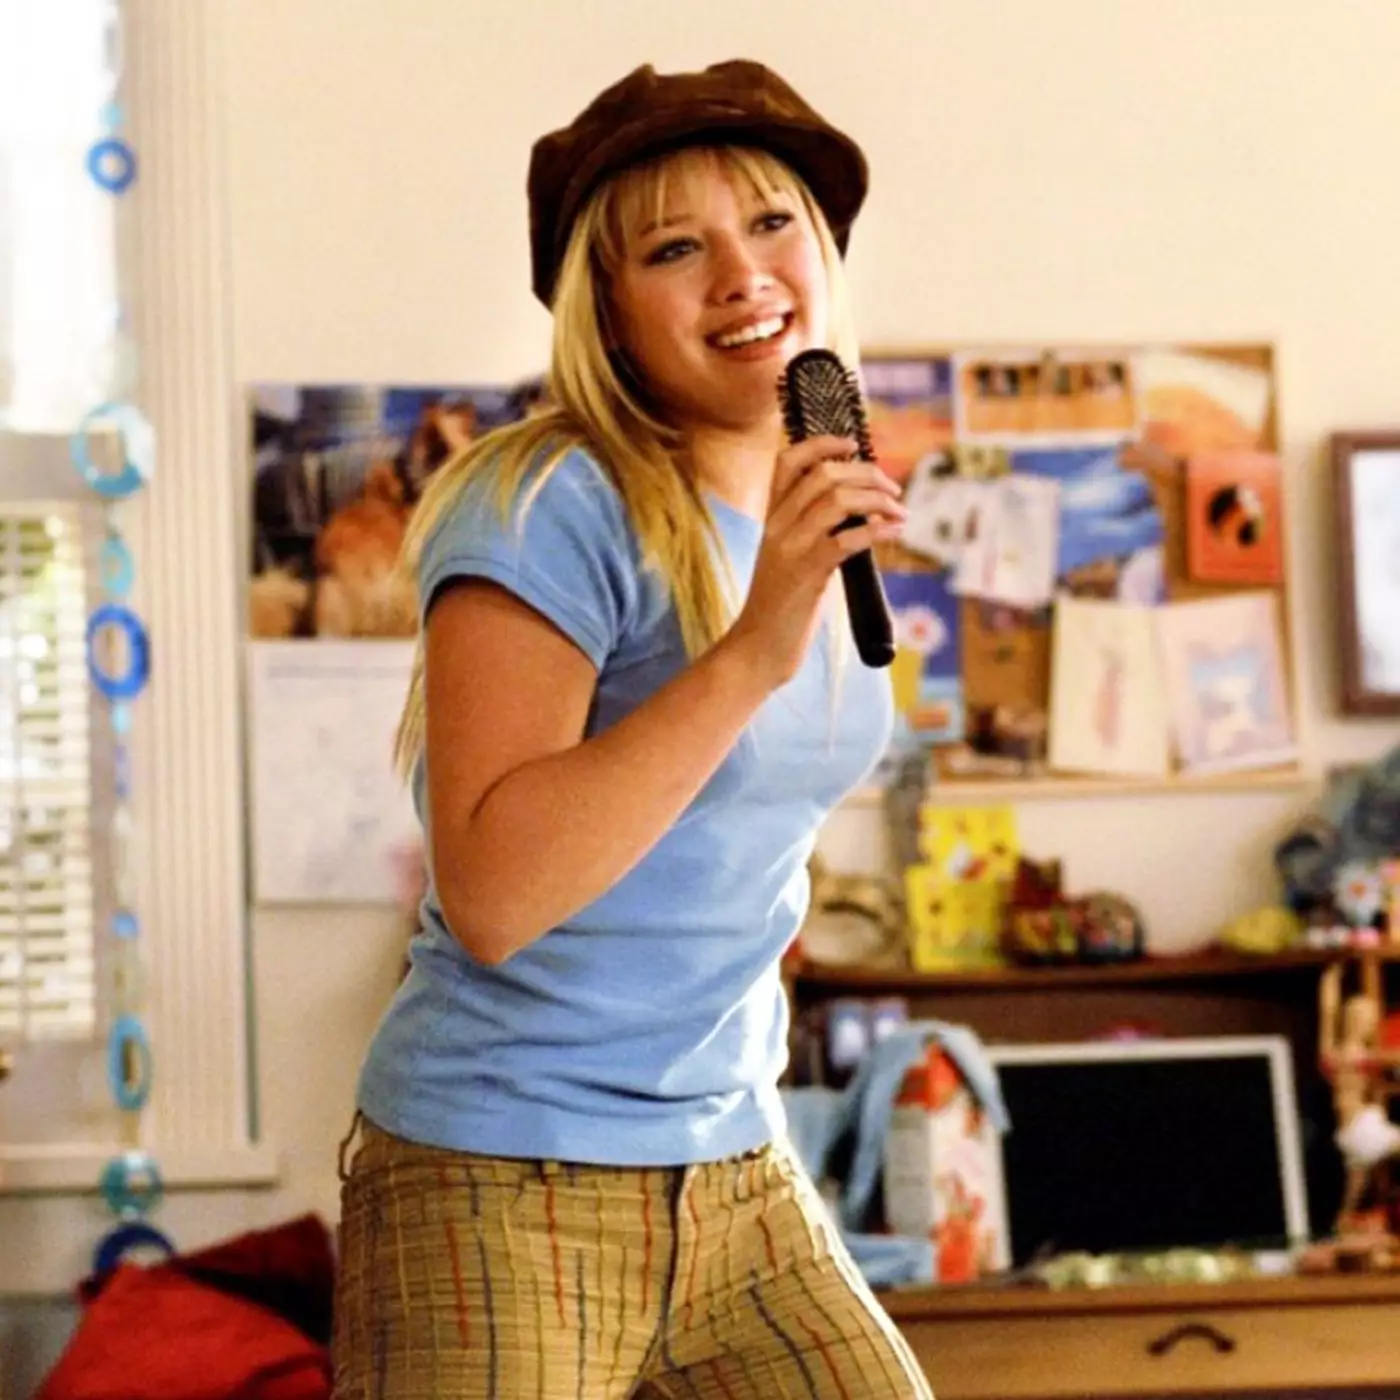 It also includes all the 'Lizzie McGuire' episodes (